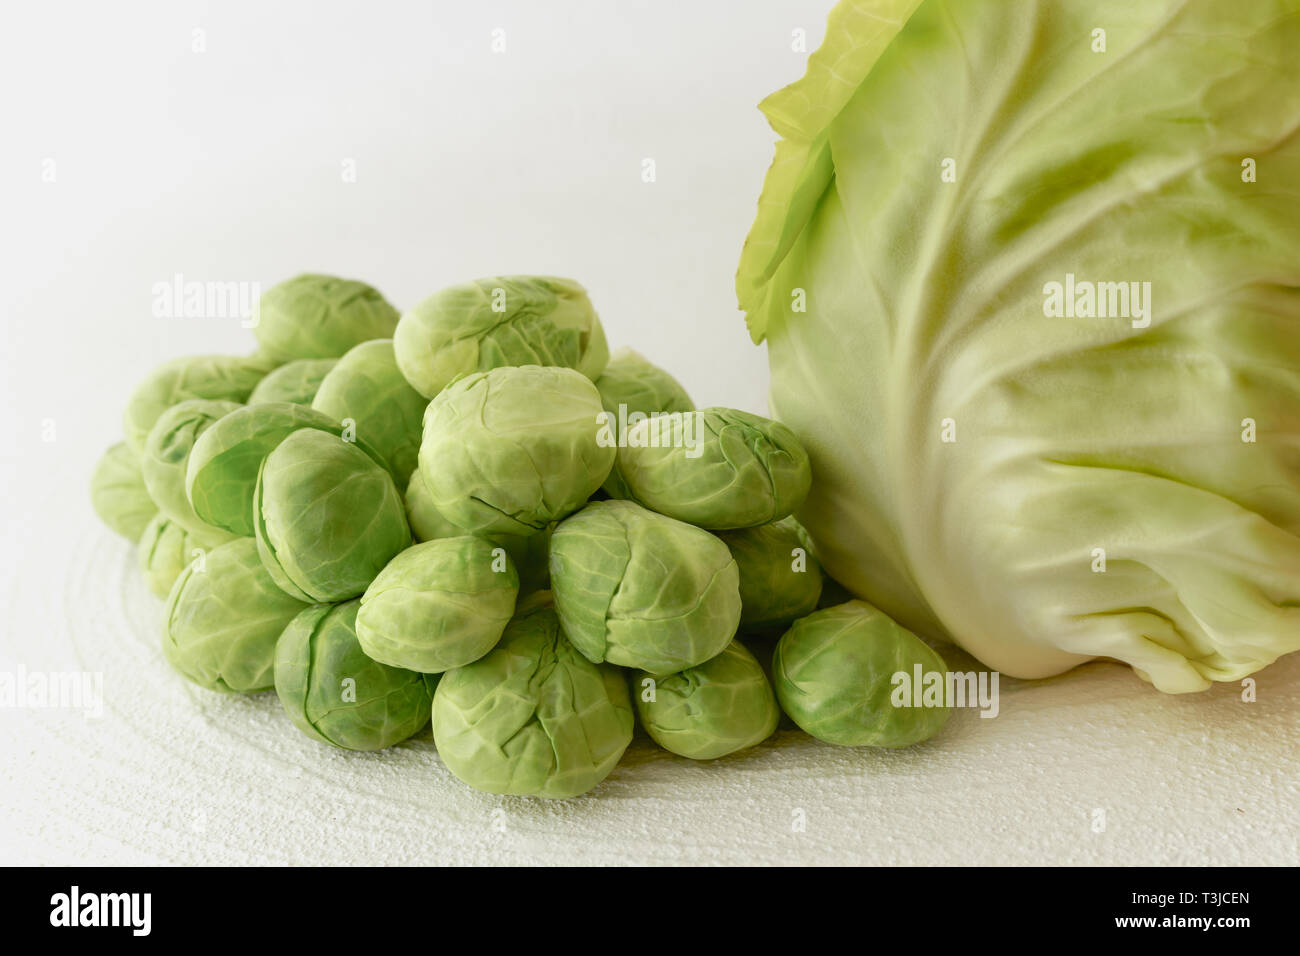 Close up of Brussels Sprouts and Green Cabbage on White Background Stock Photo